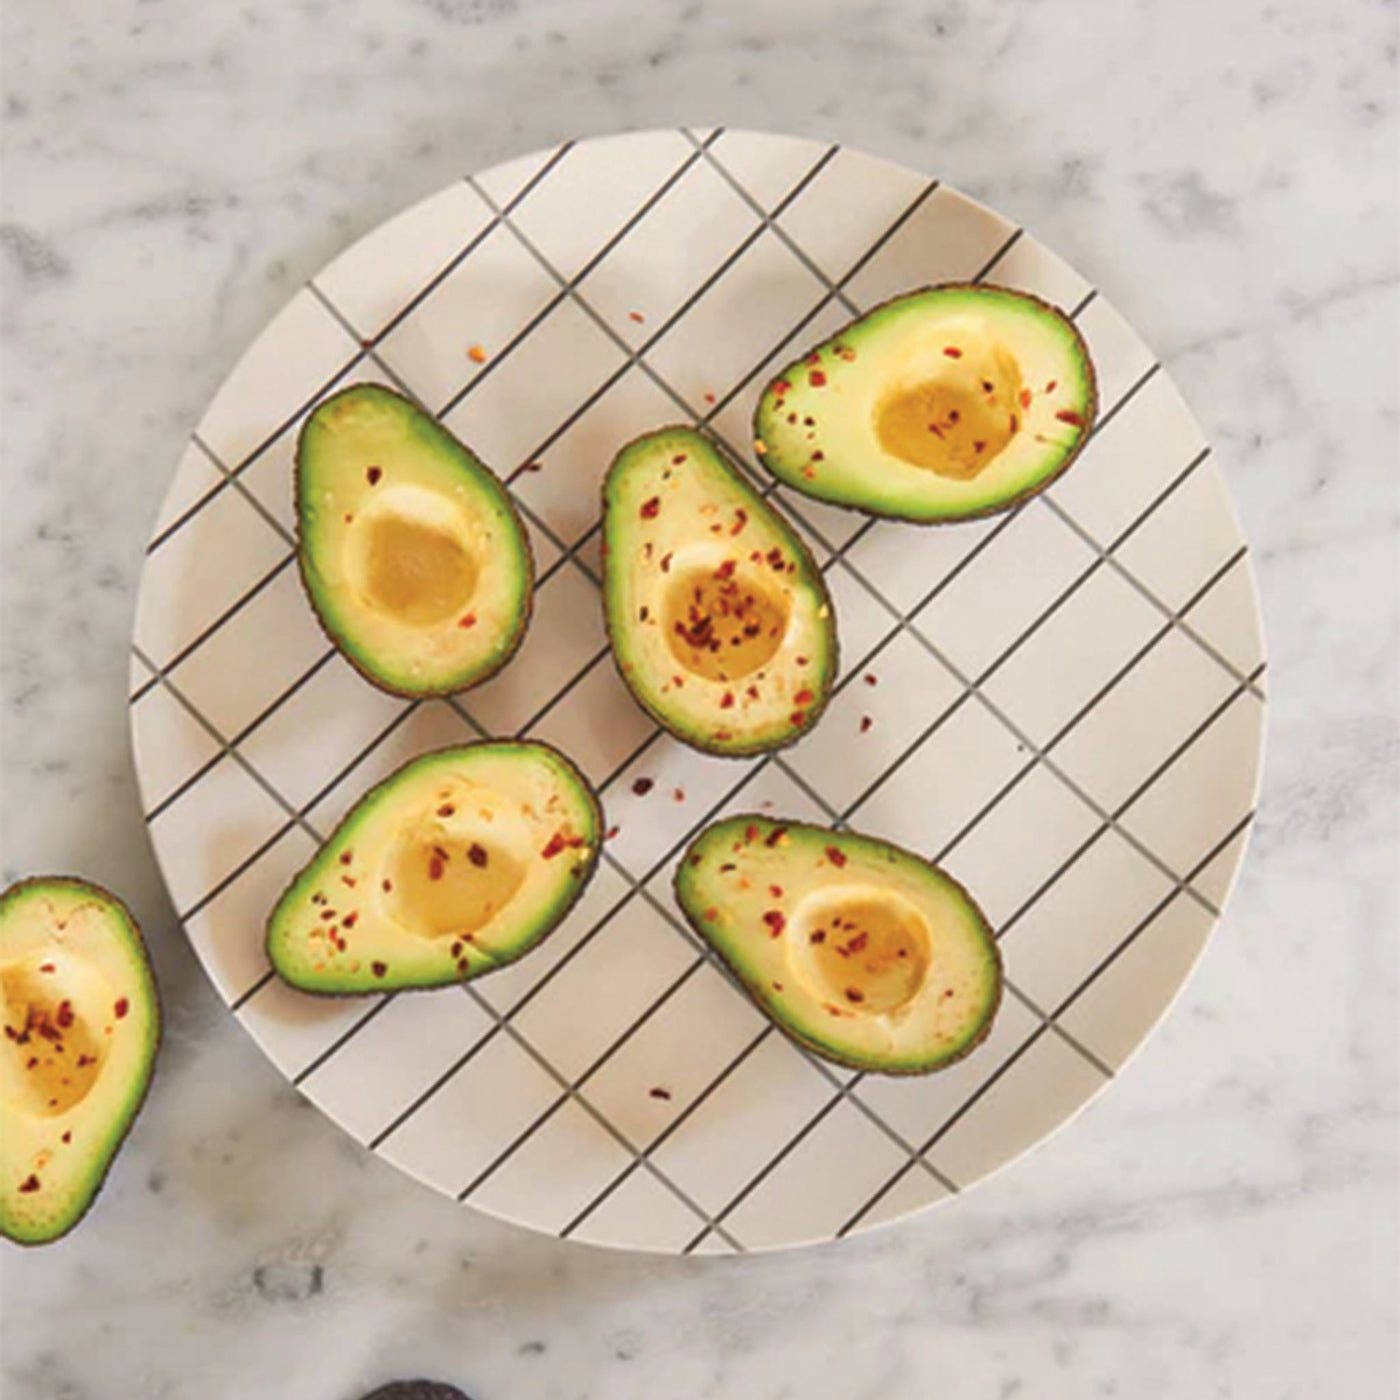 Bamboo Grid Tray holding avocados on the kitchen dining table